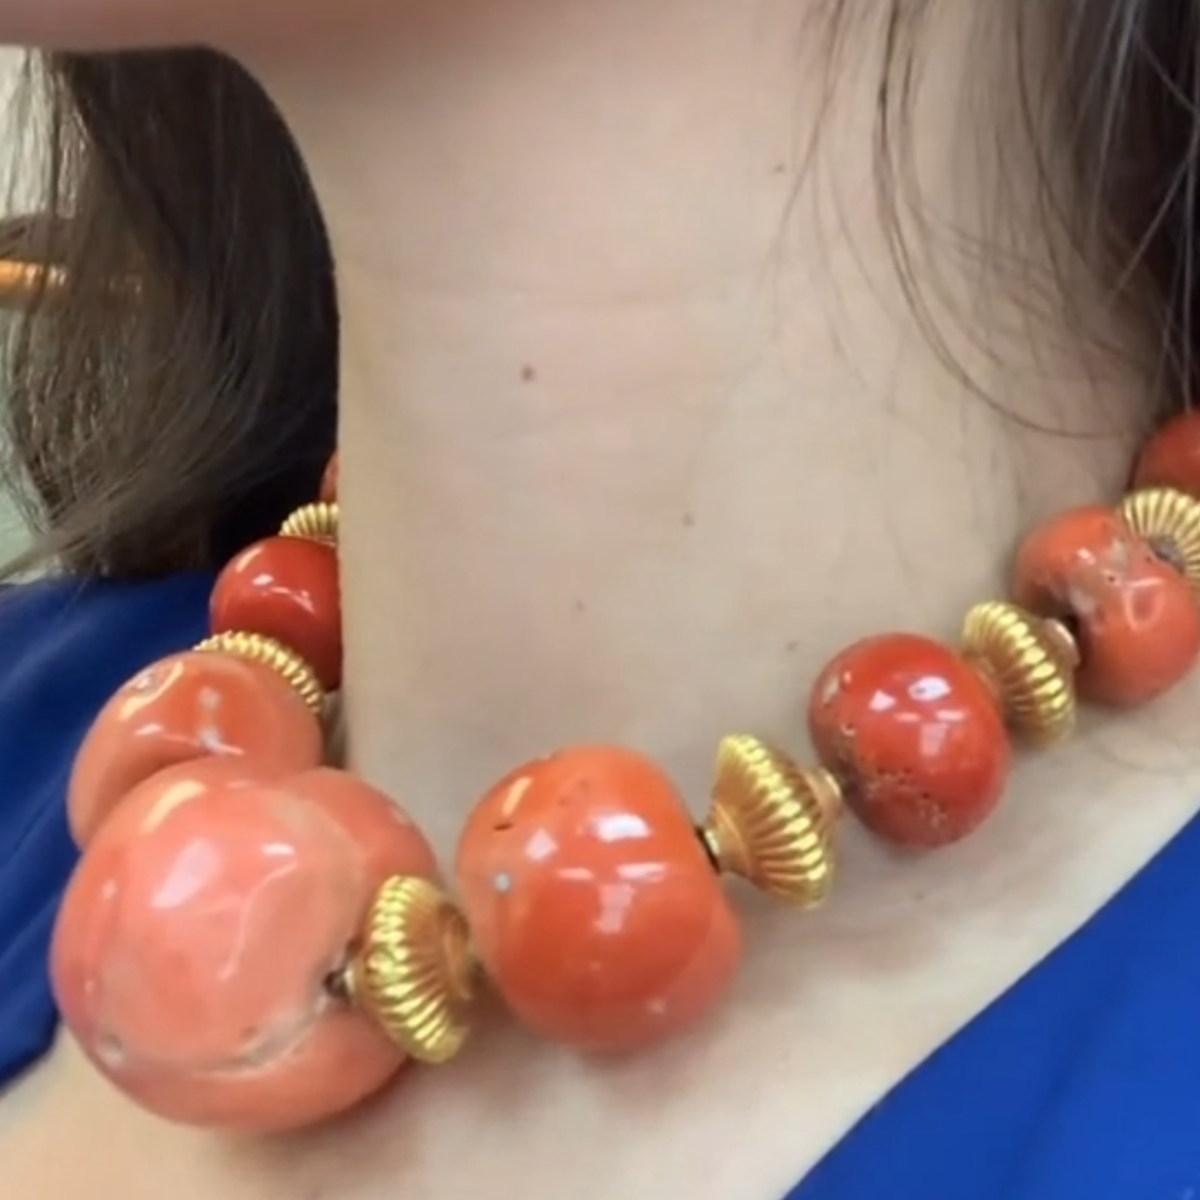 74-Inch Pink with White Coral Bead Necklace